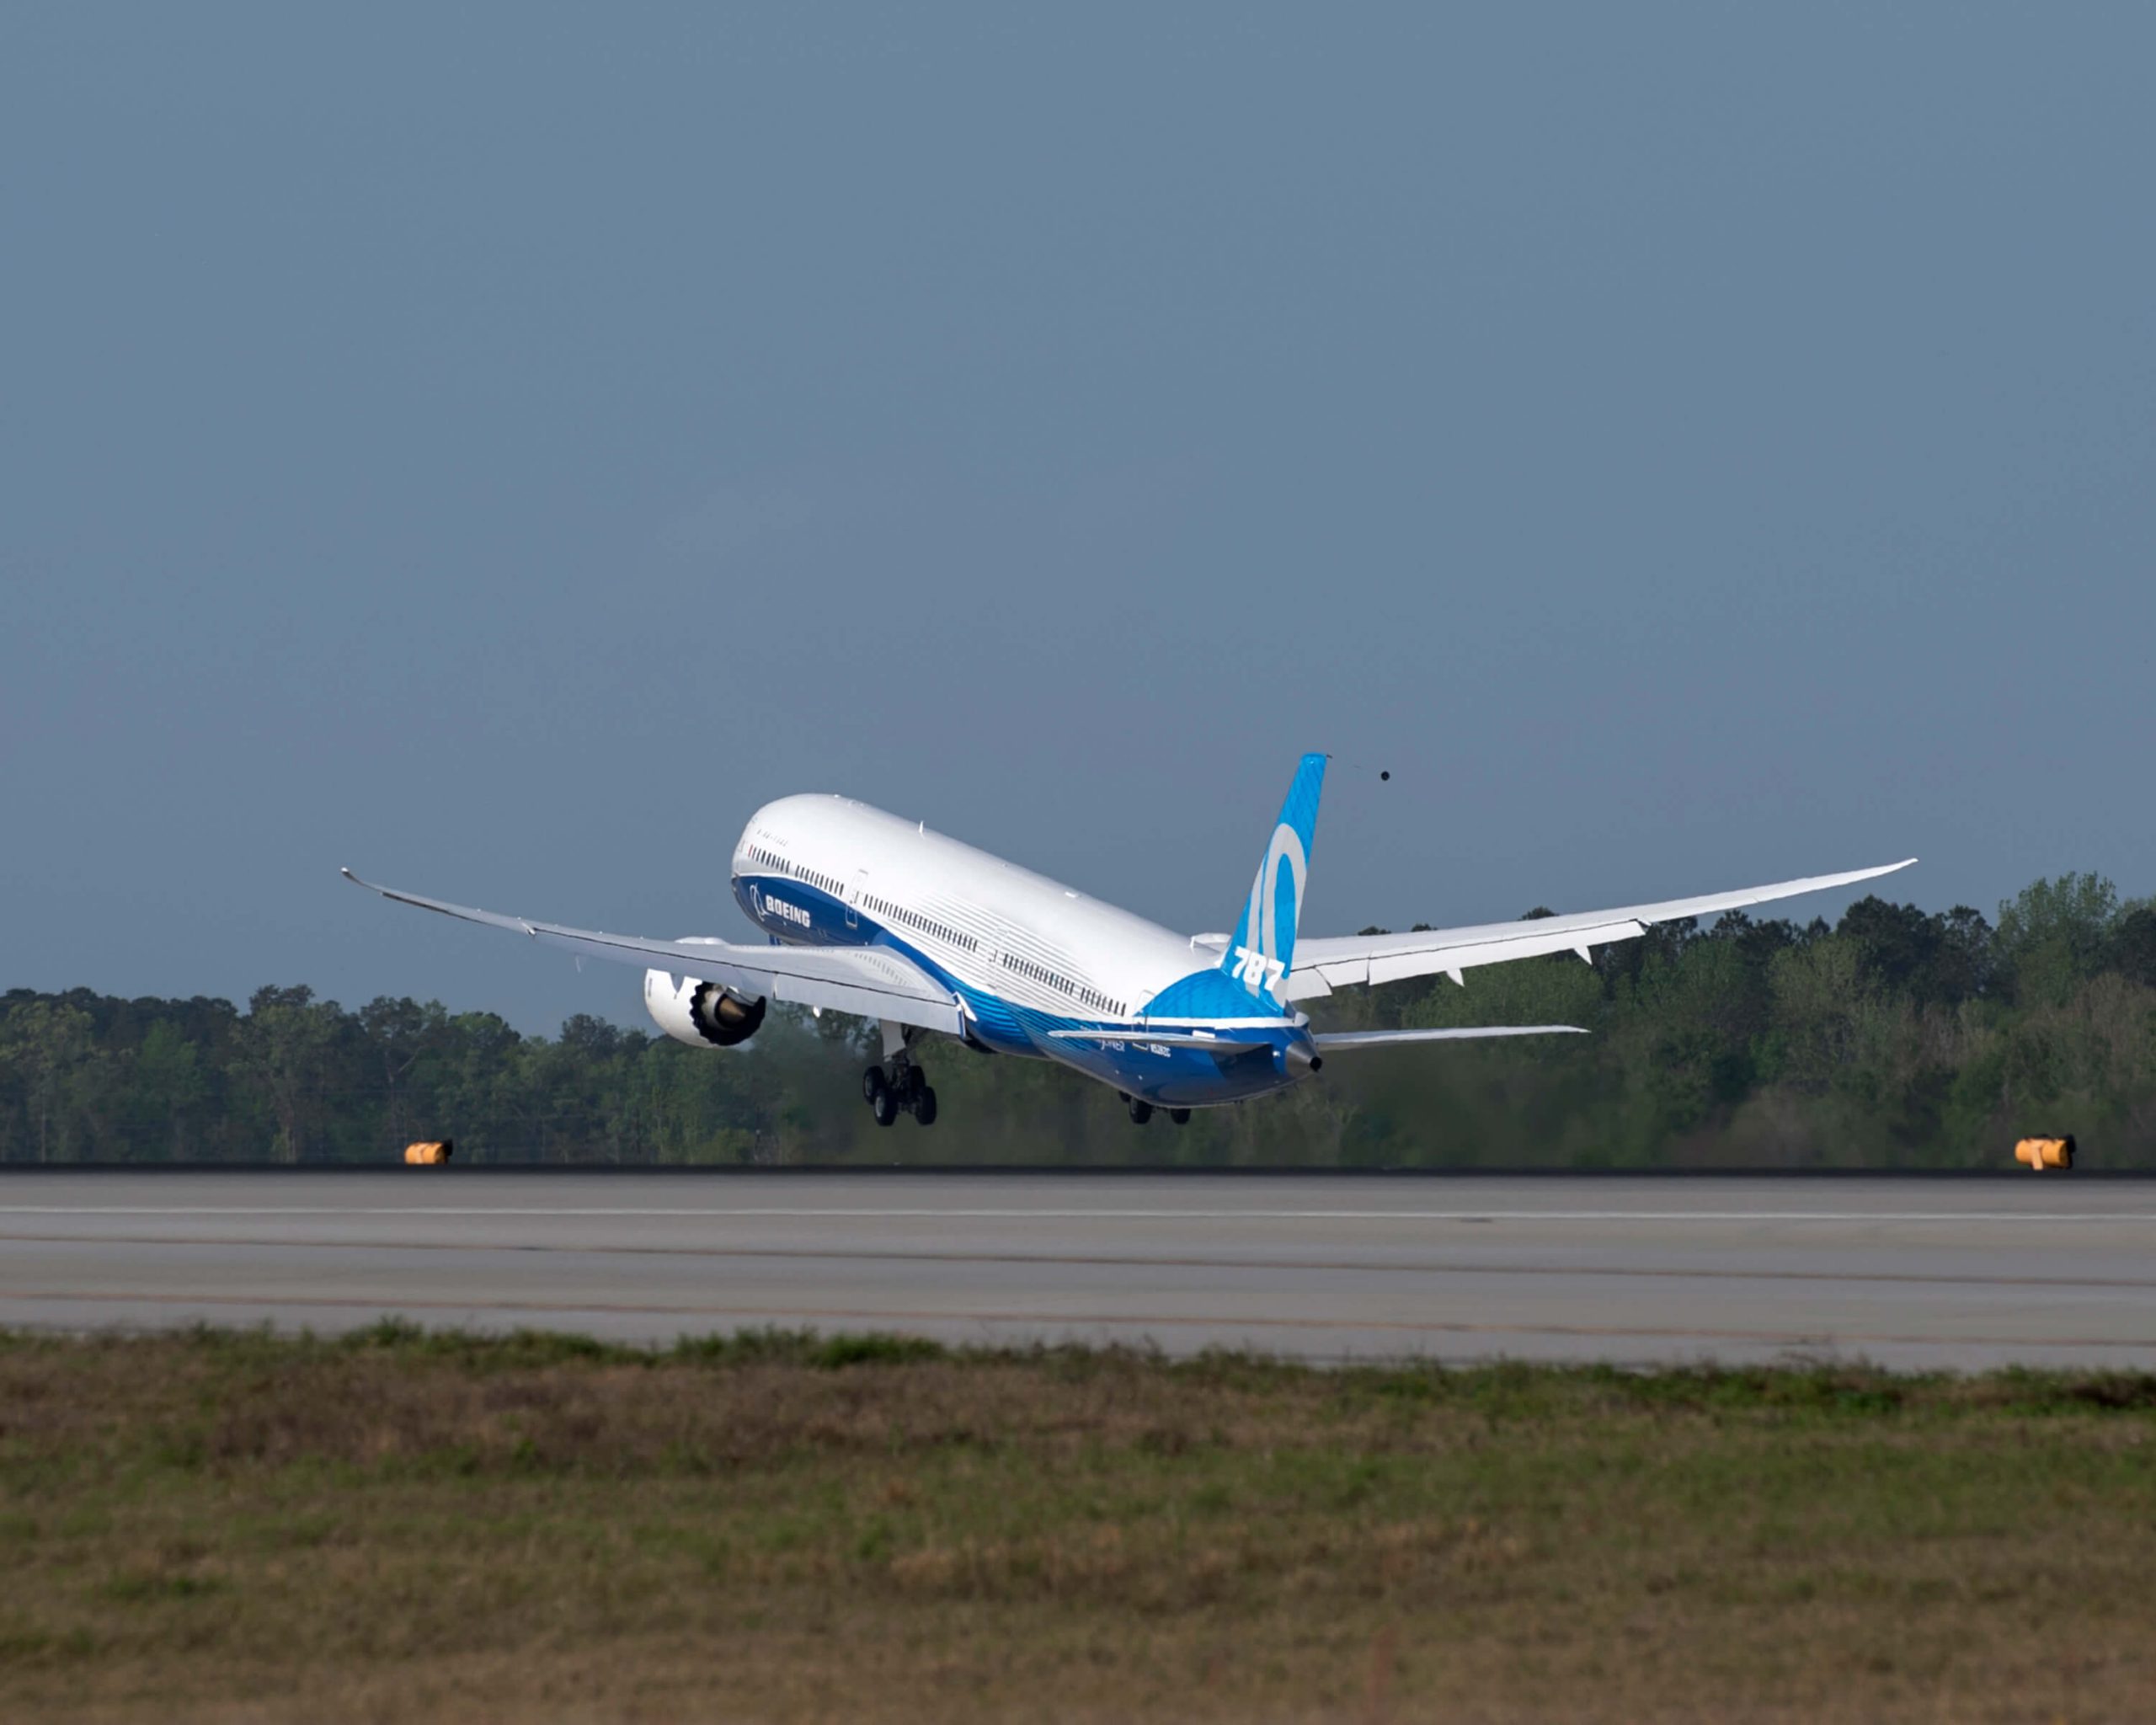 Two Boeing 787 Dreamliners acquired by CALC